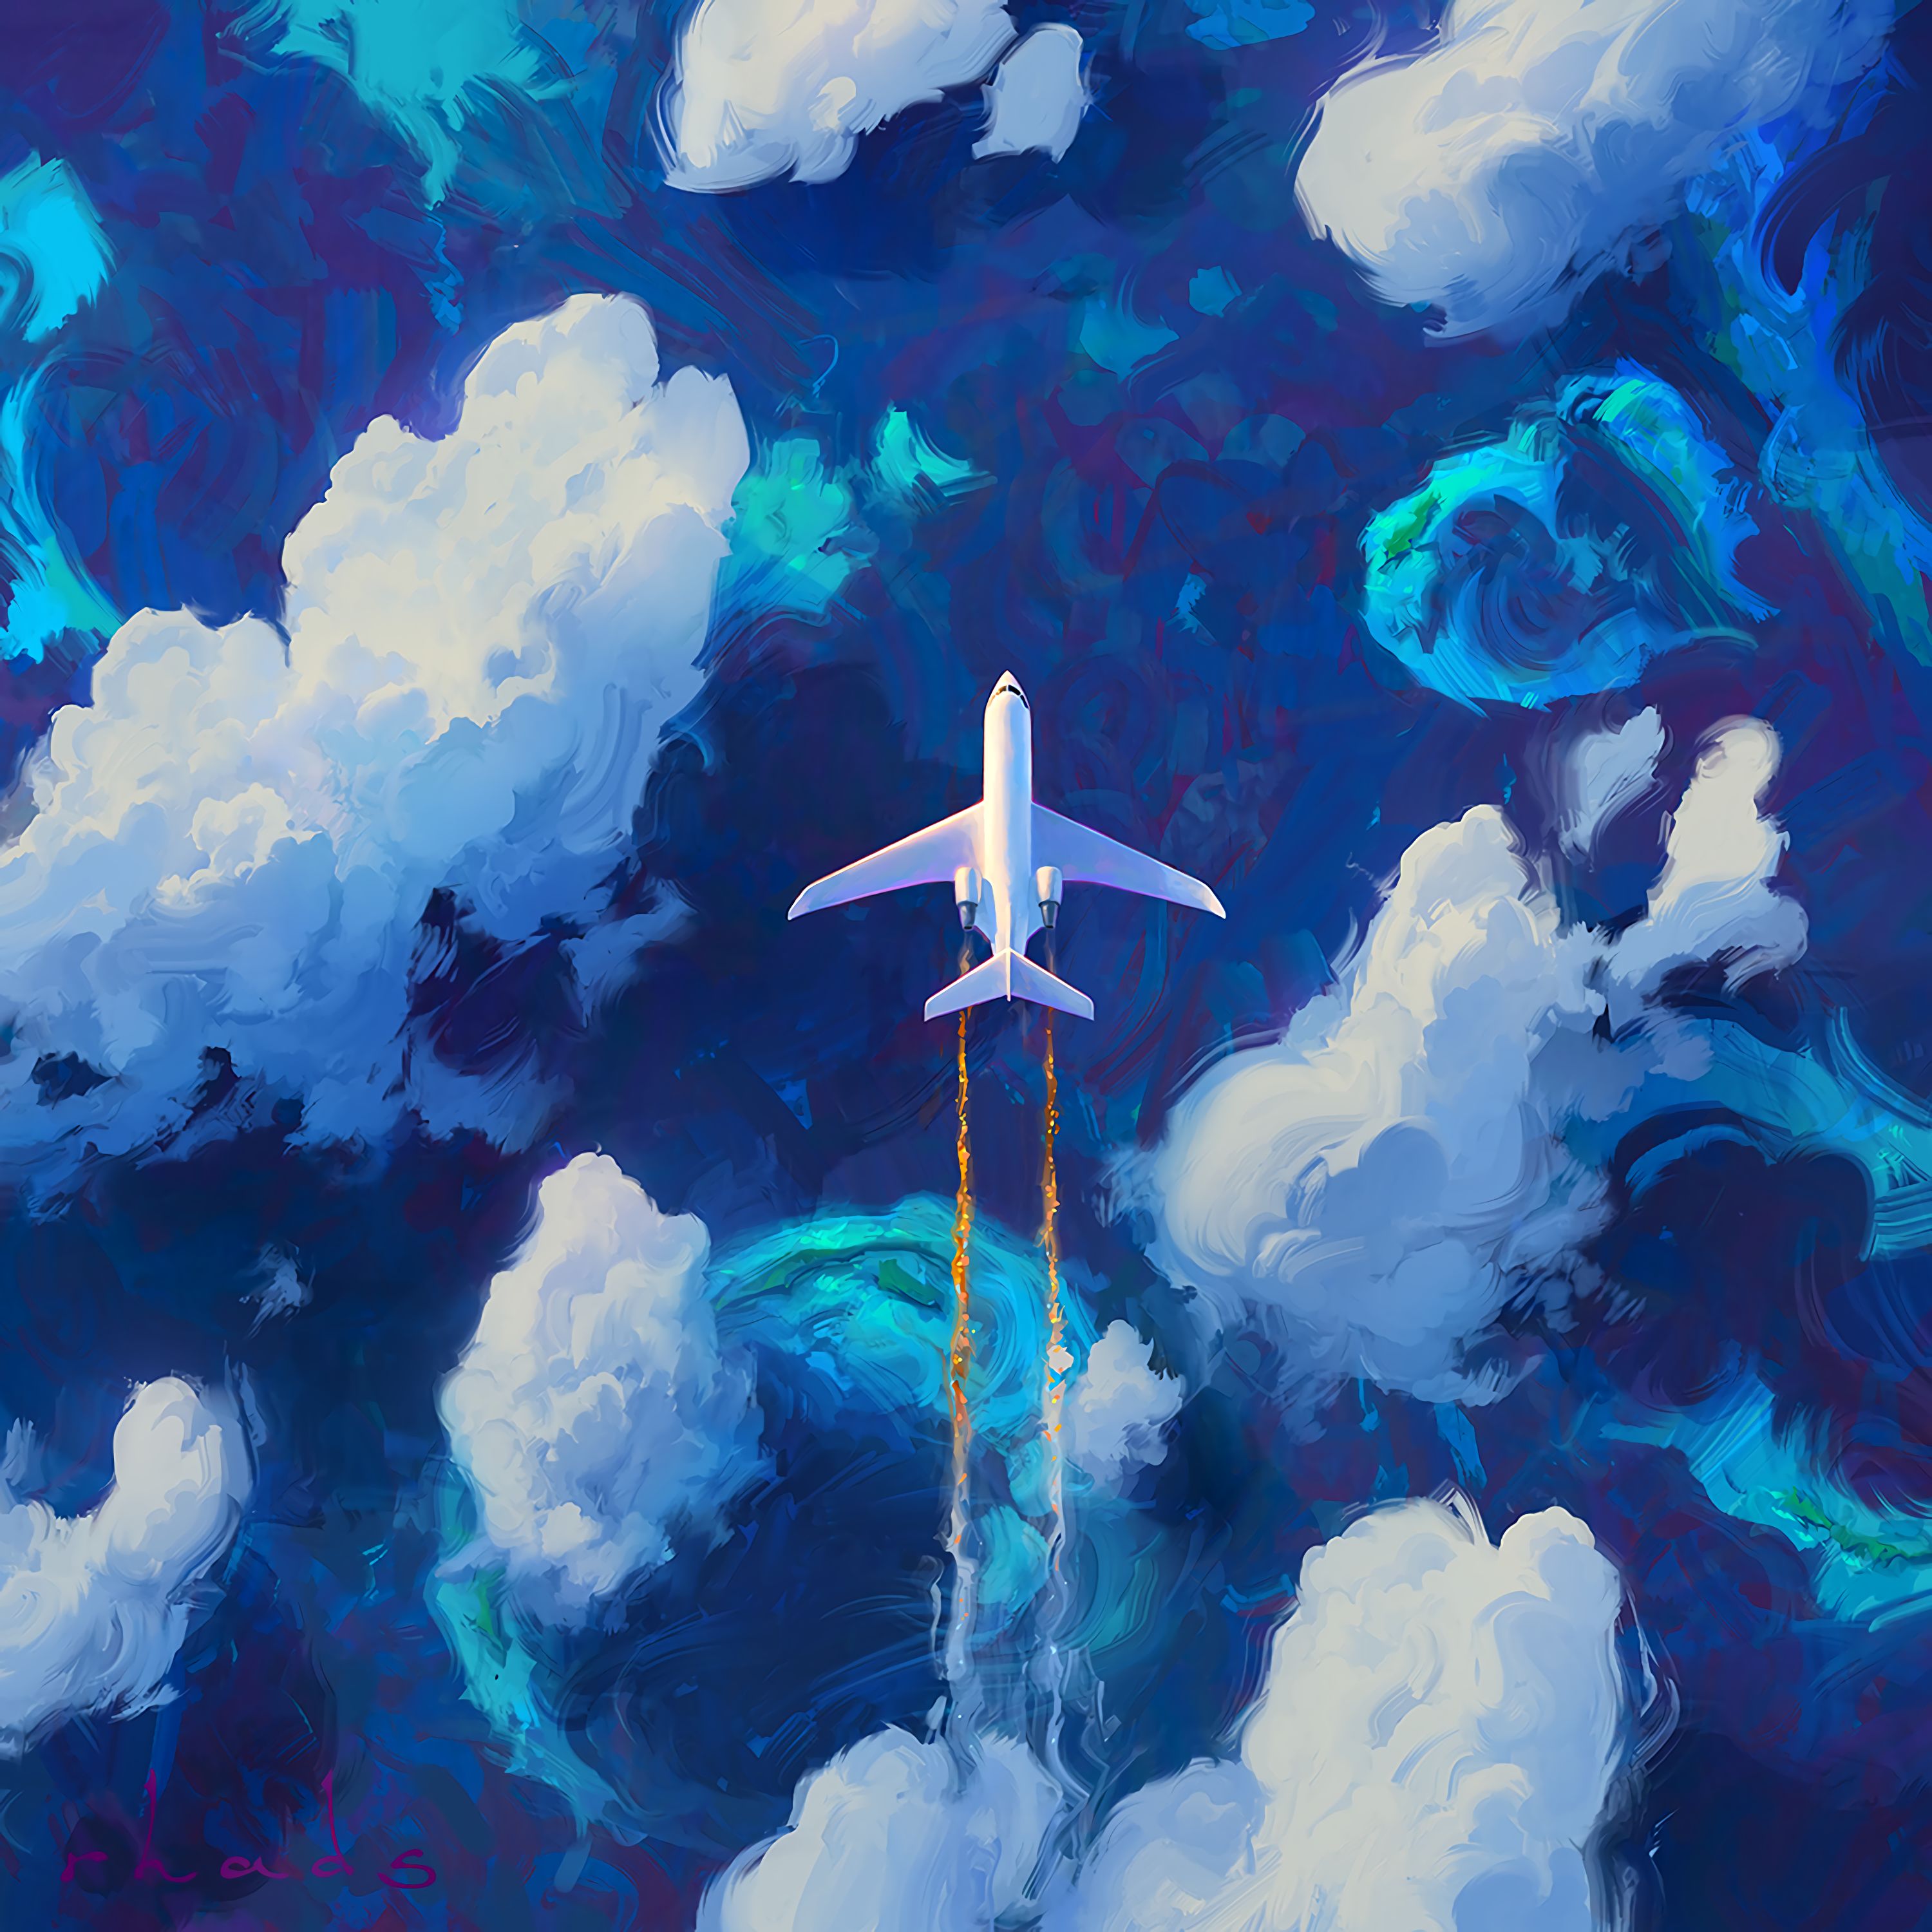 android art, plane, clouds, airplane, flight, sky